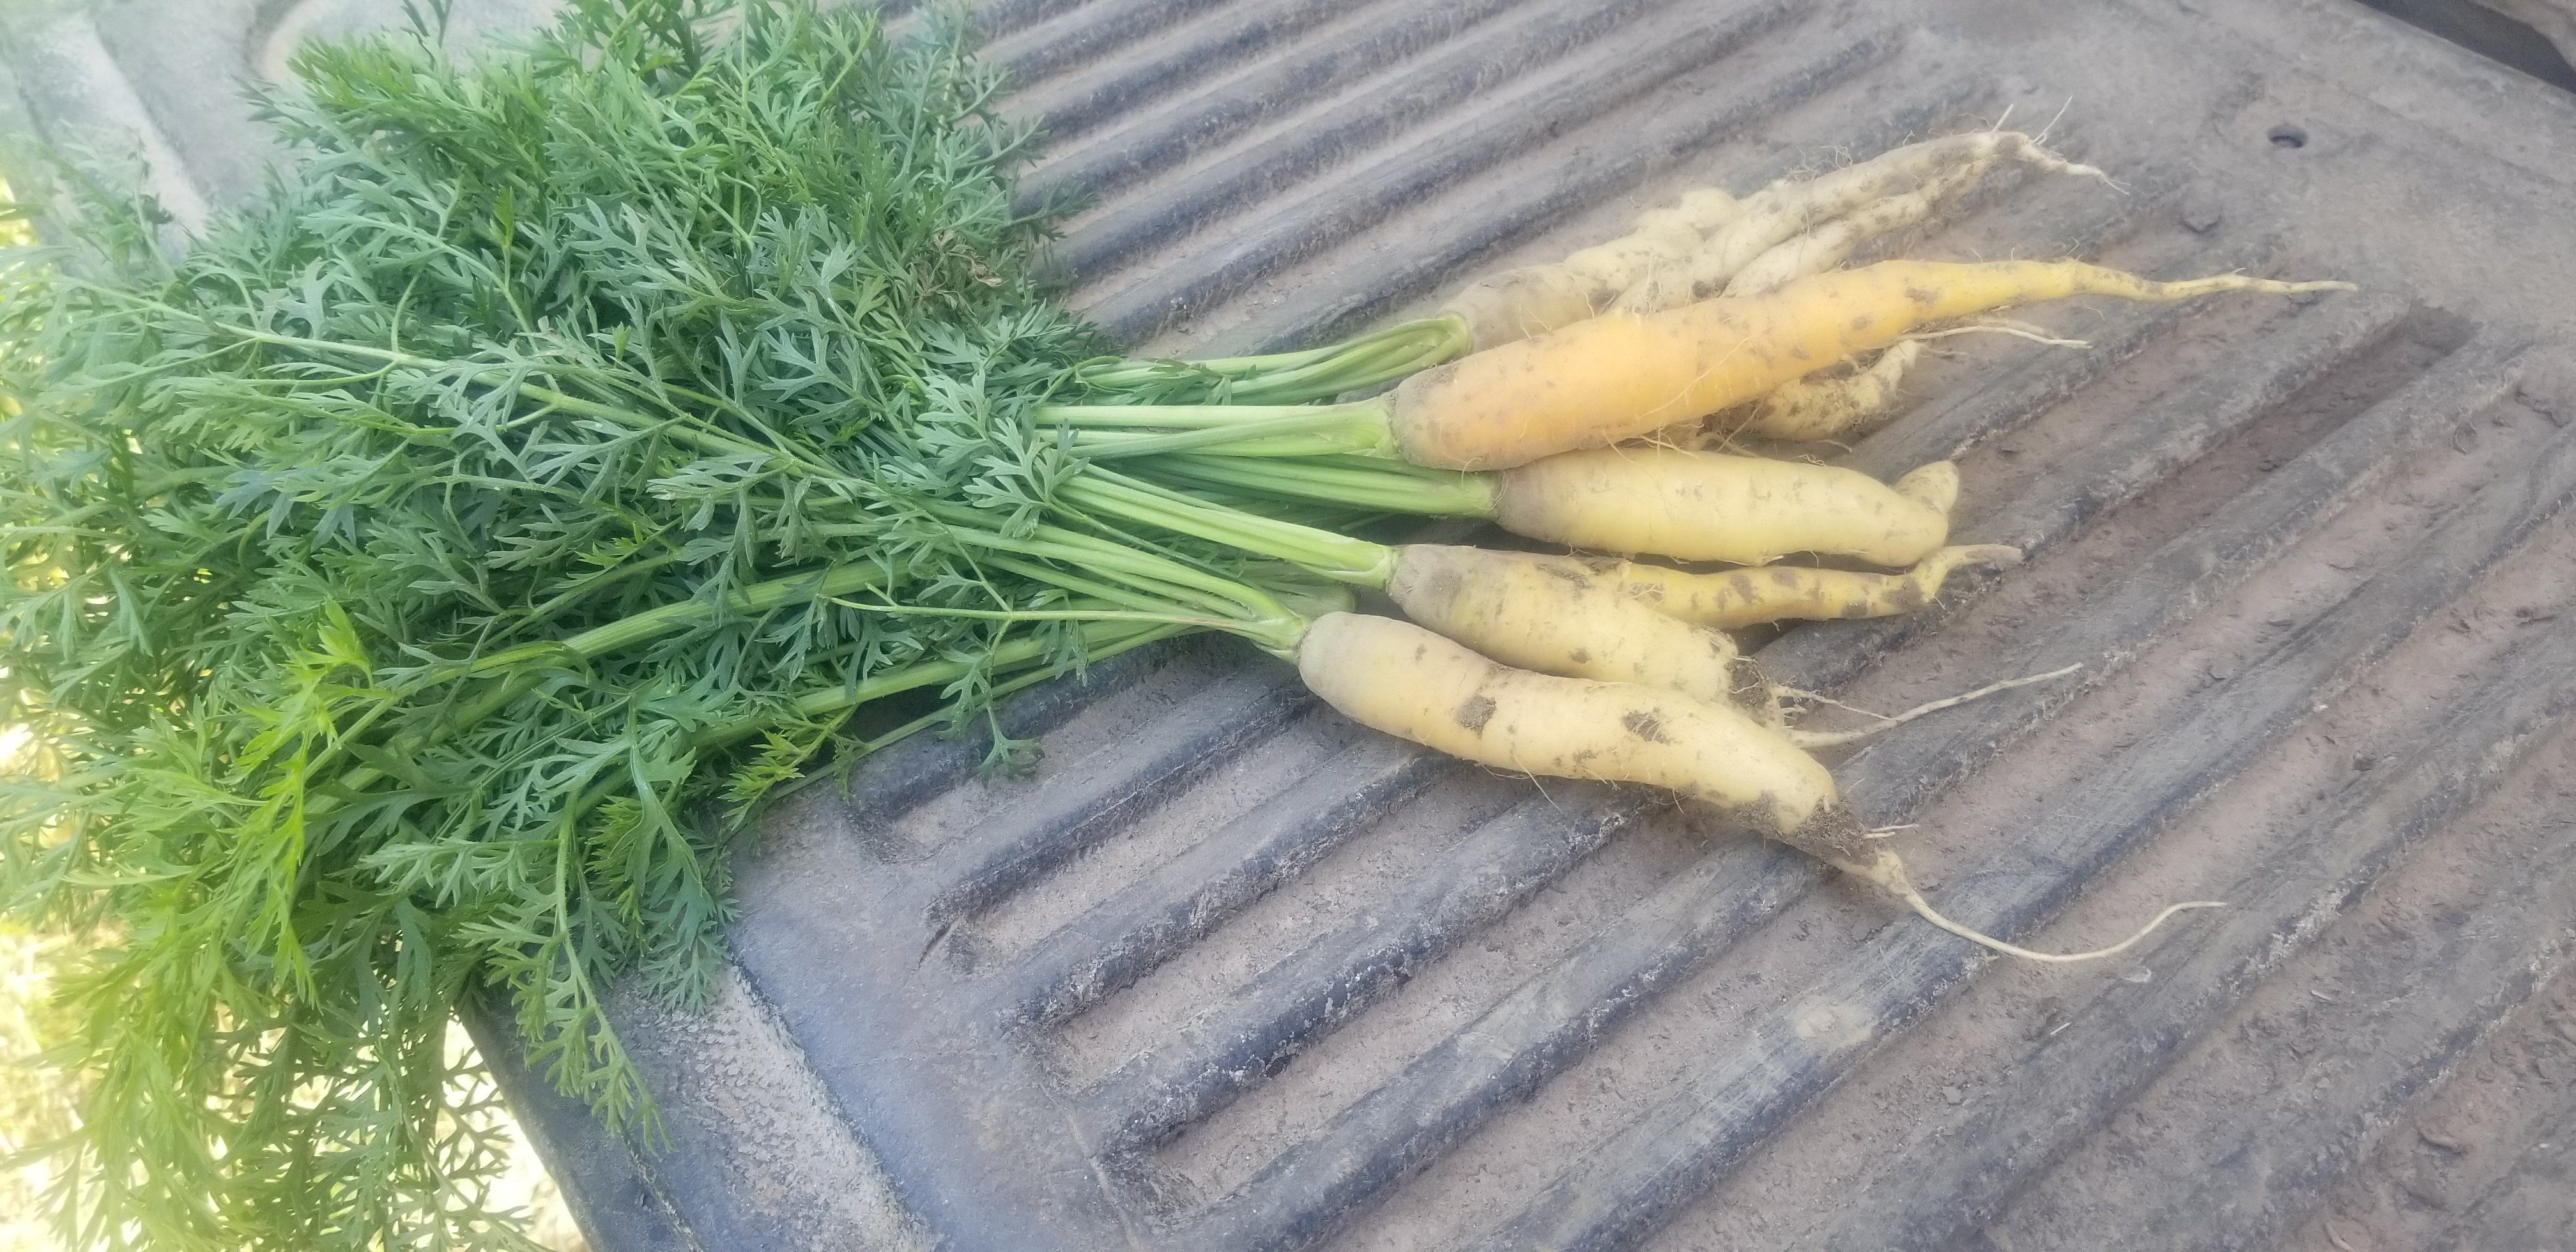 Previous Happening: Farm Happenings for the week of August 8, 2020